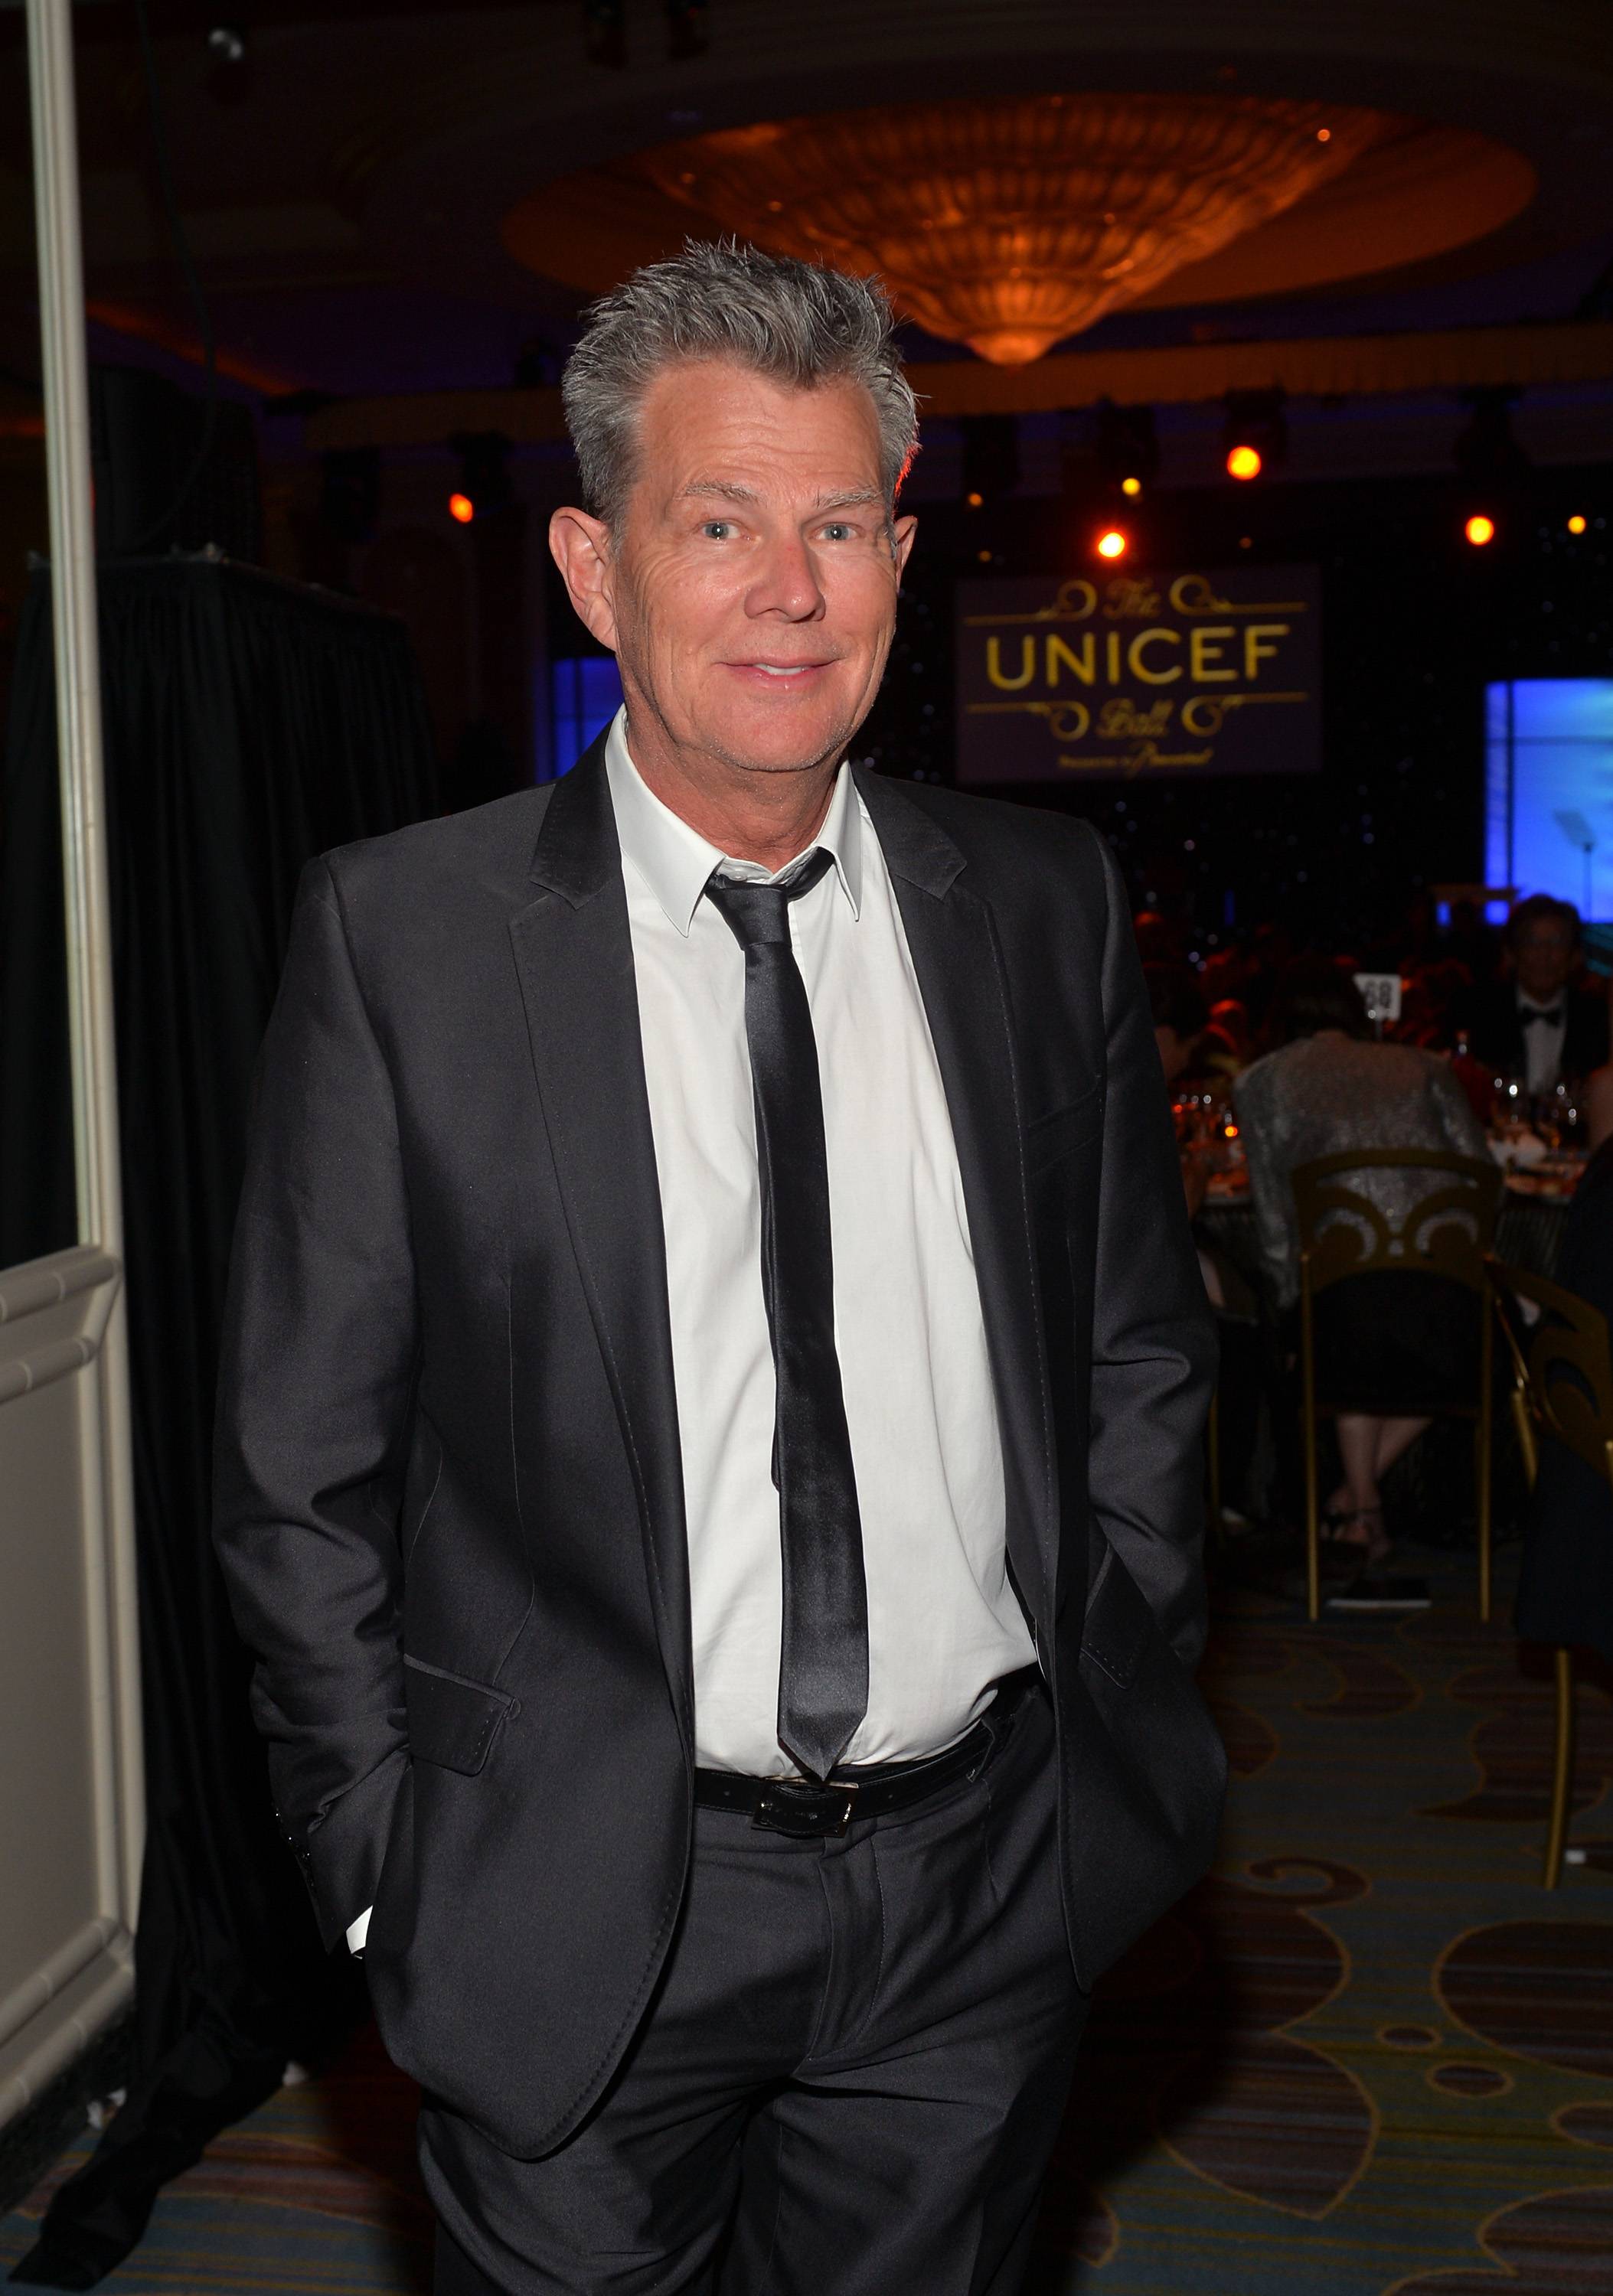 The 2014 UNICEF Ball Presented By Baccarat - Inside